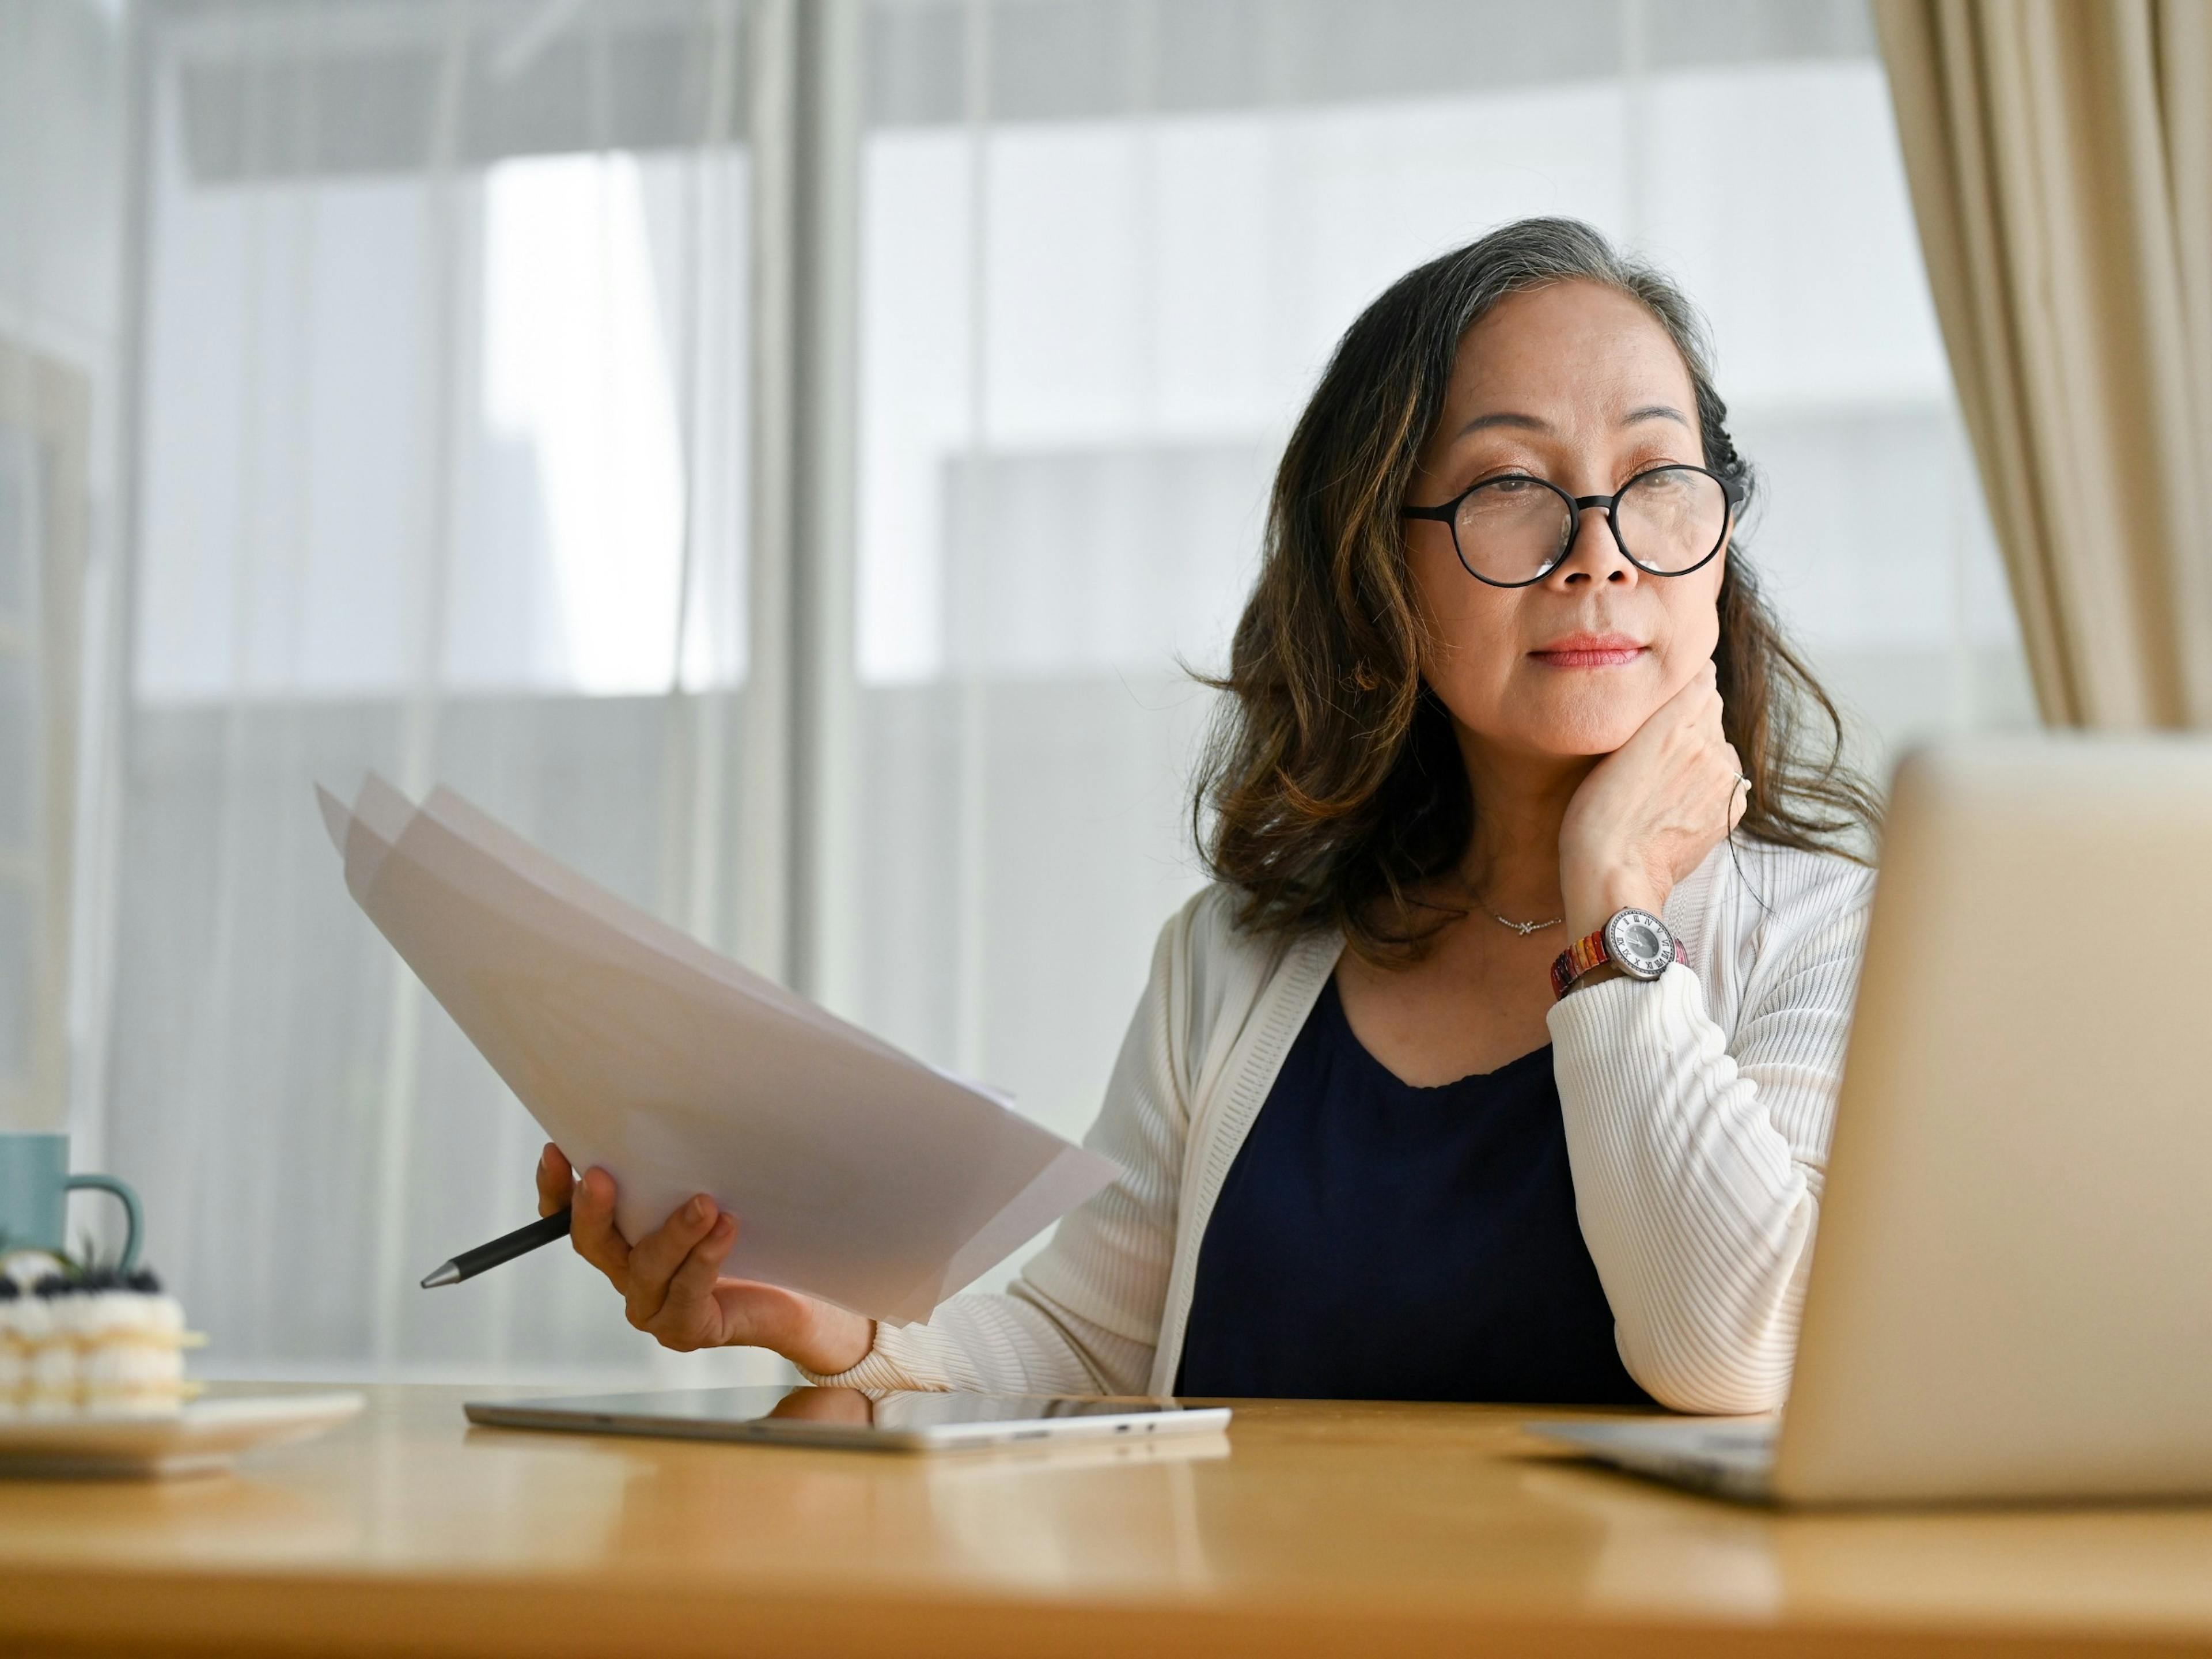 a lady with glasses working from home at a computer holding papers to review